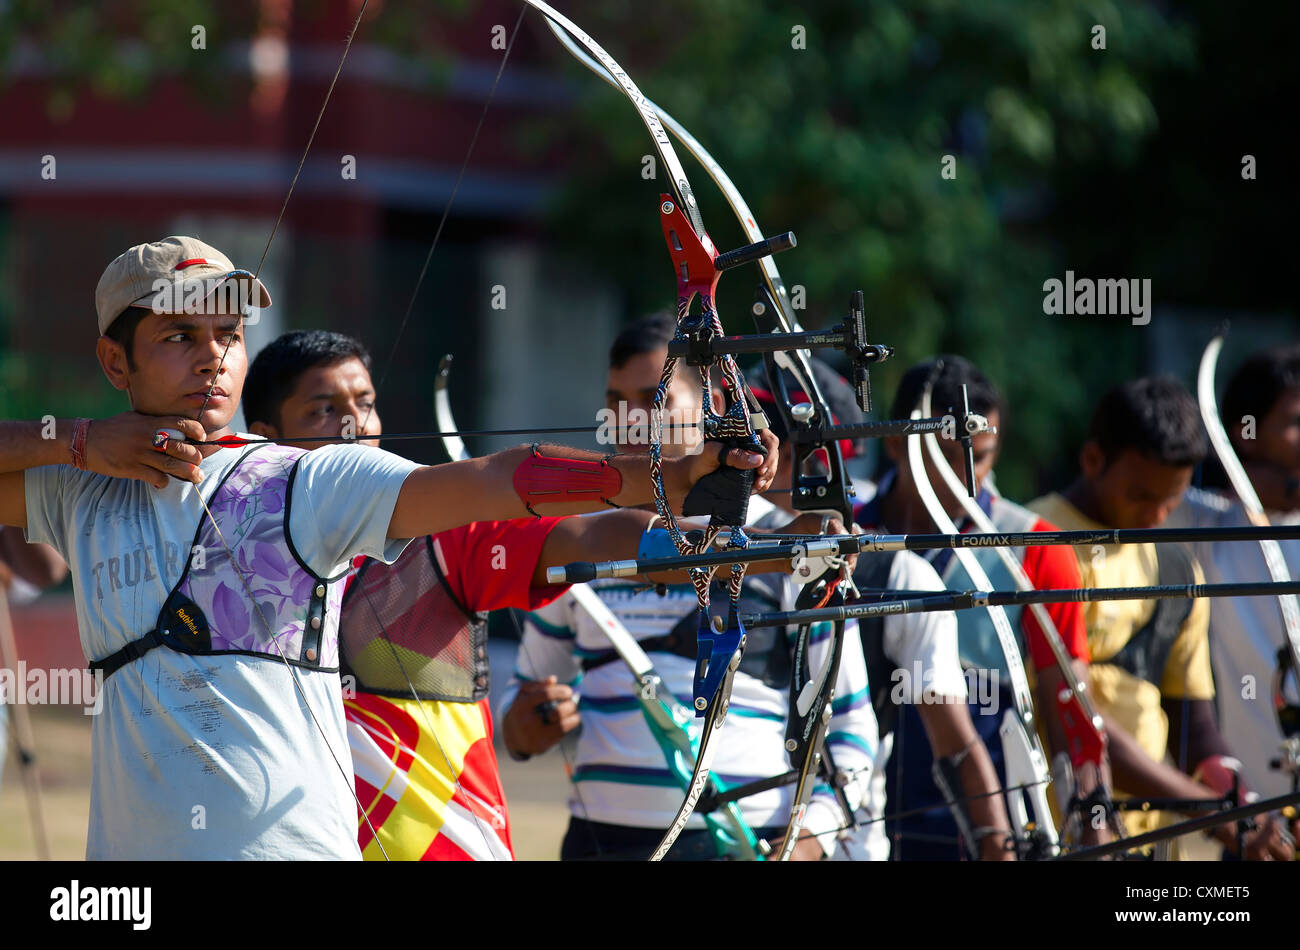 A group of Athlete compete in the national sport of archery Stock Photo